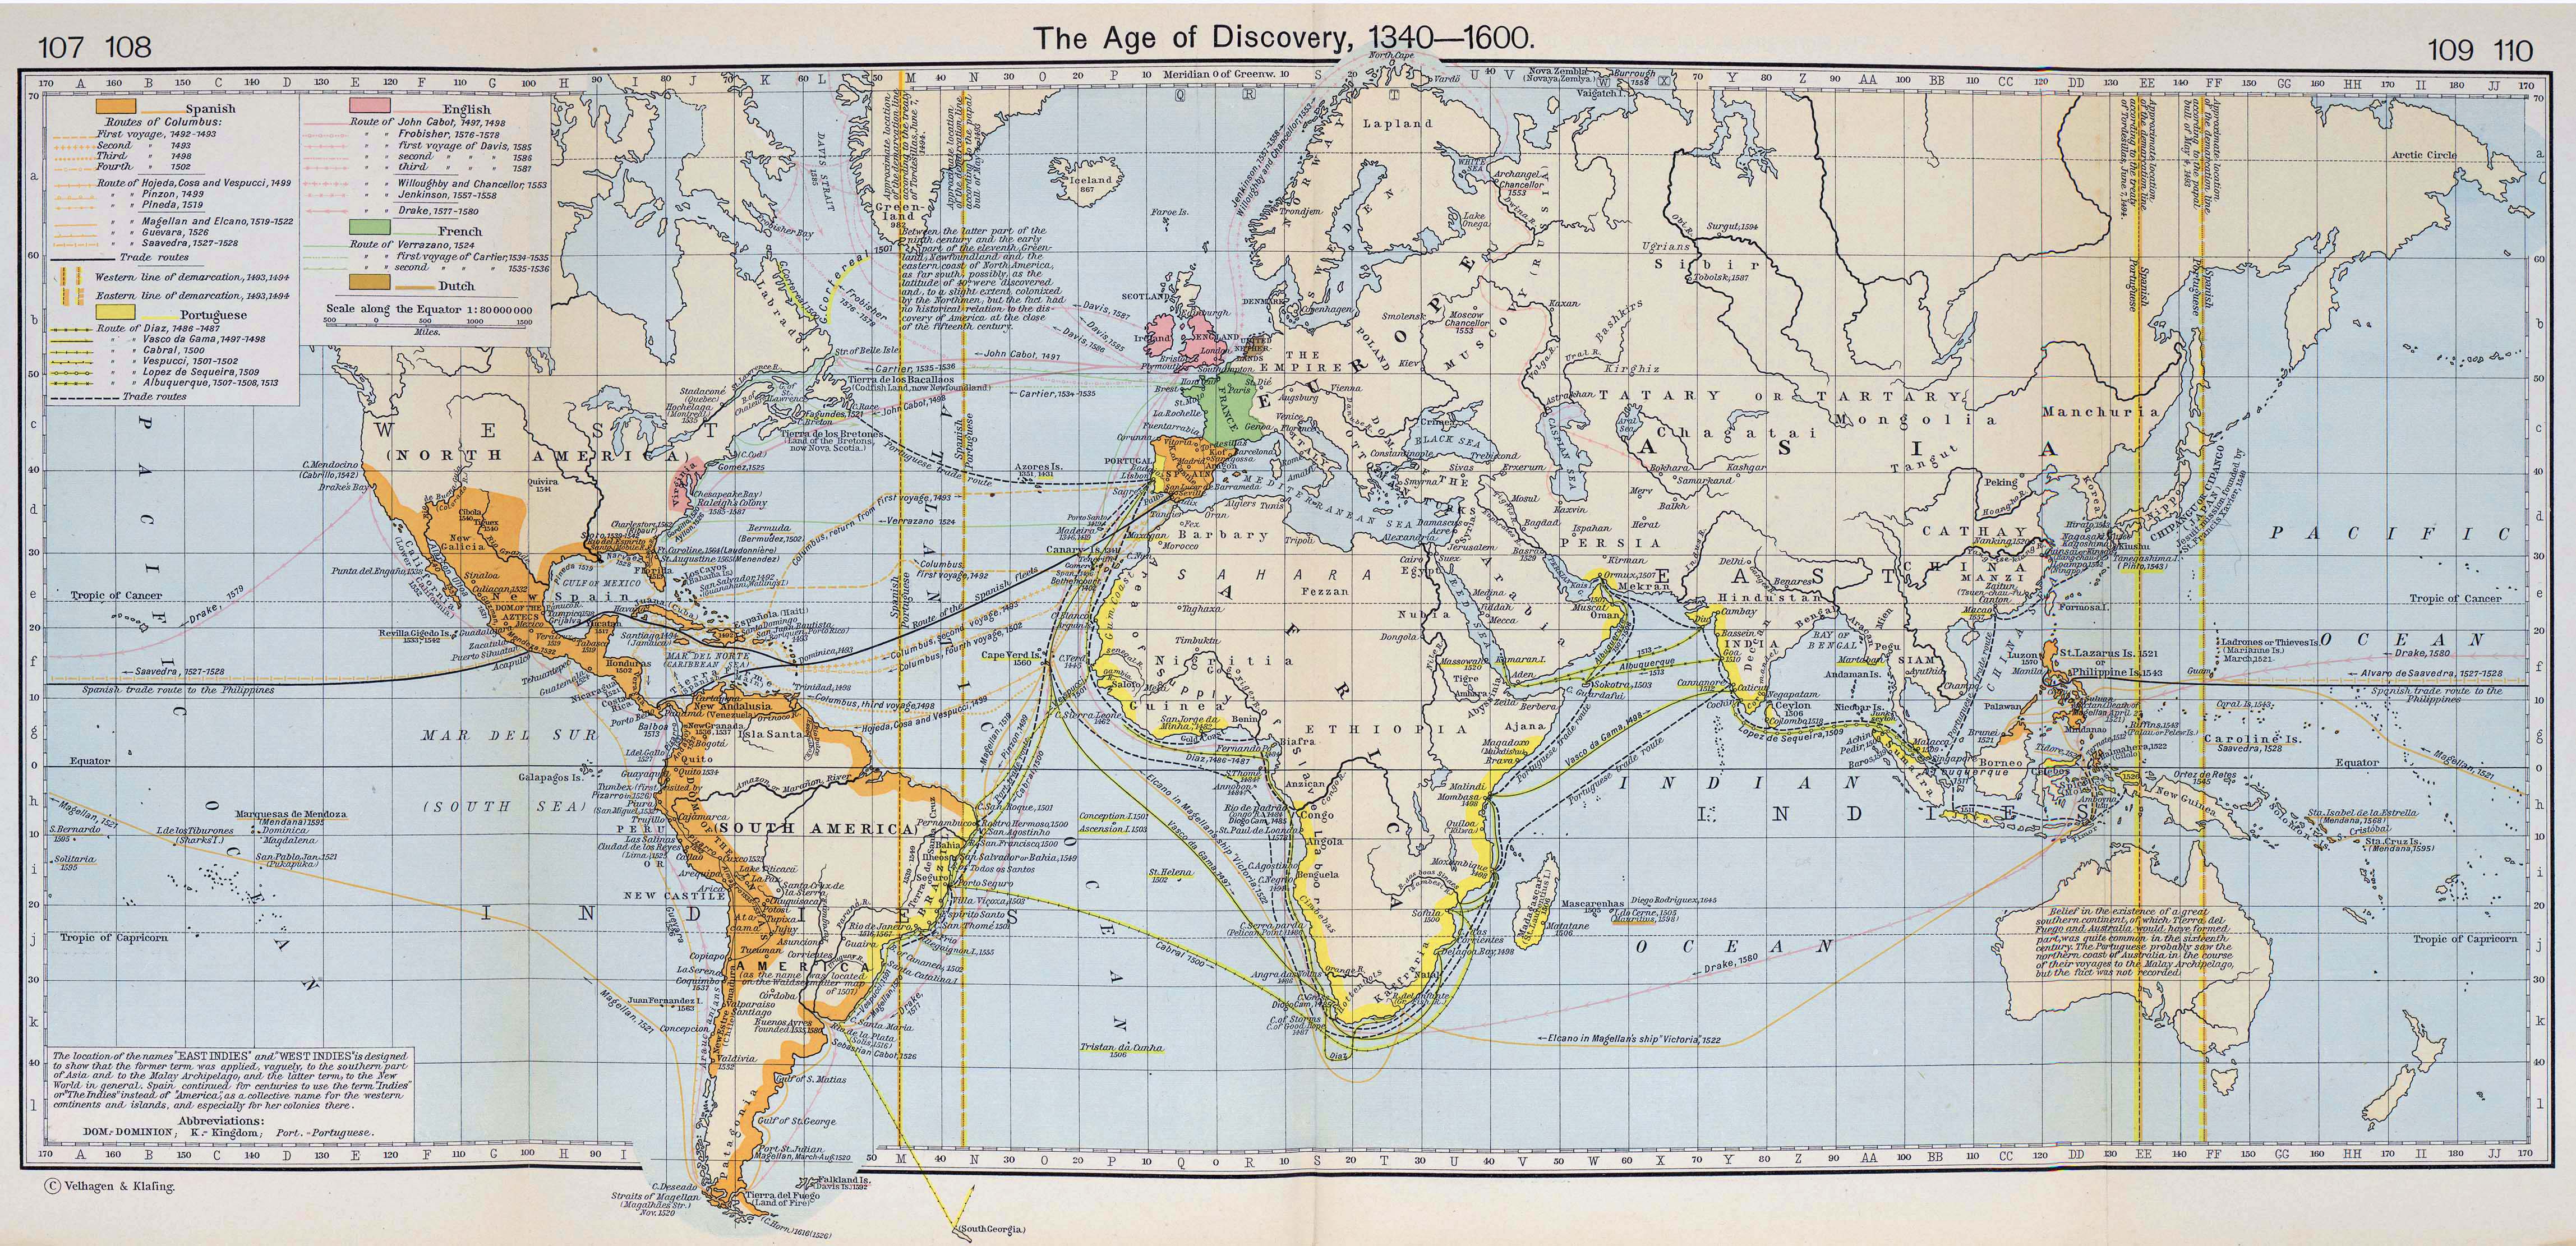 World Map 1340-1600 The Age of Discovery